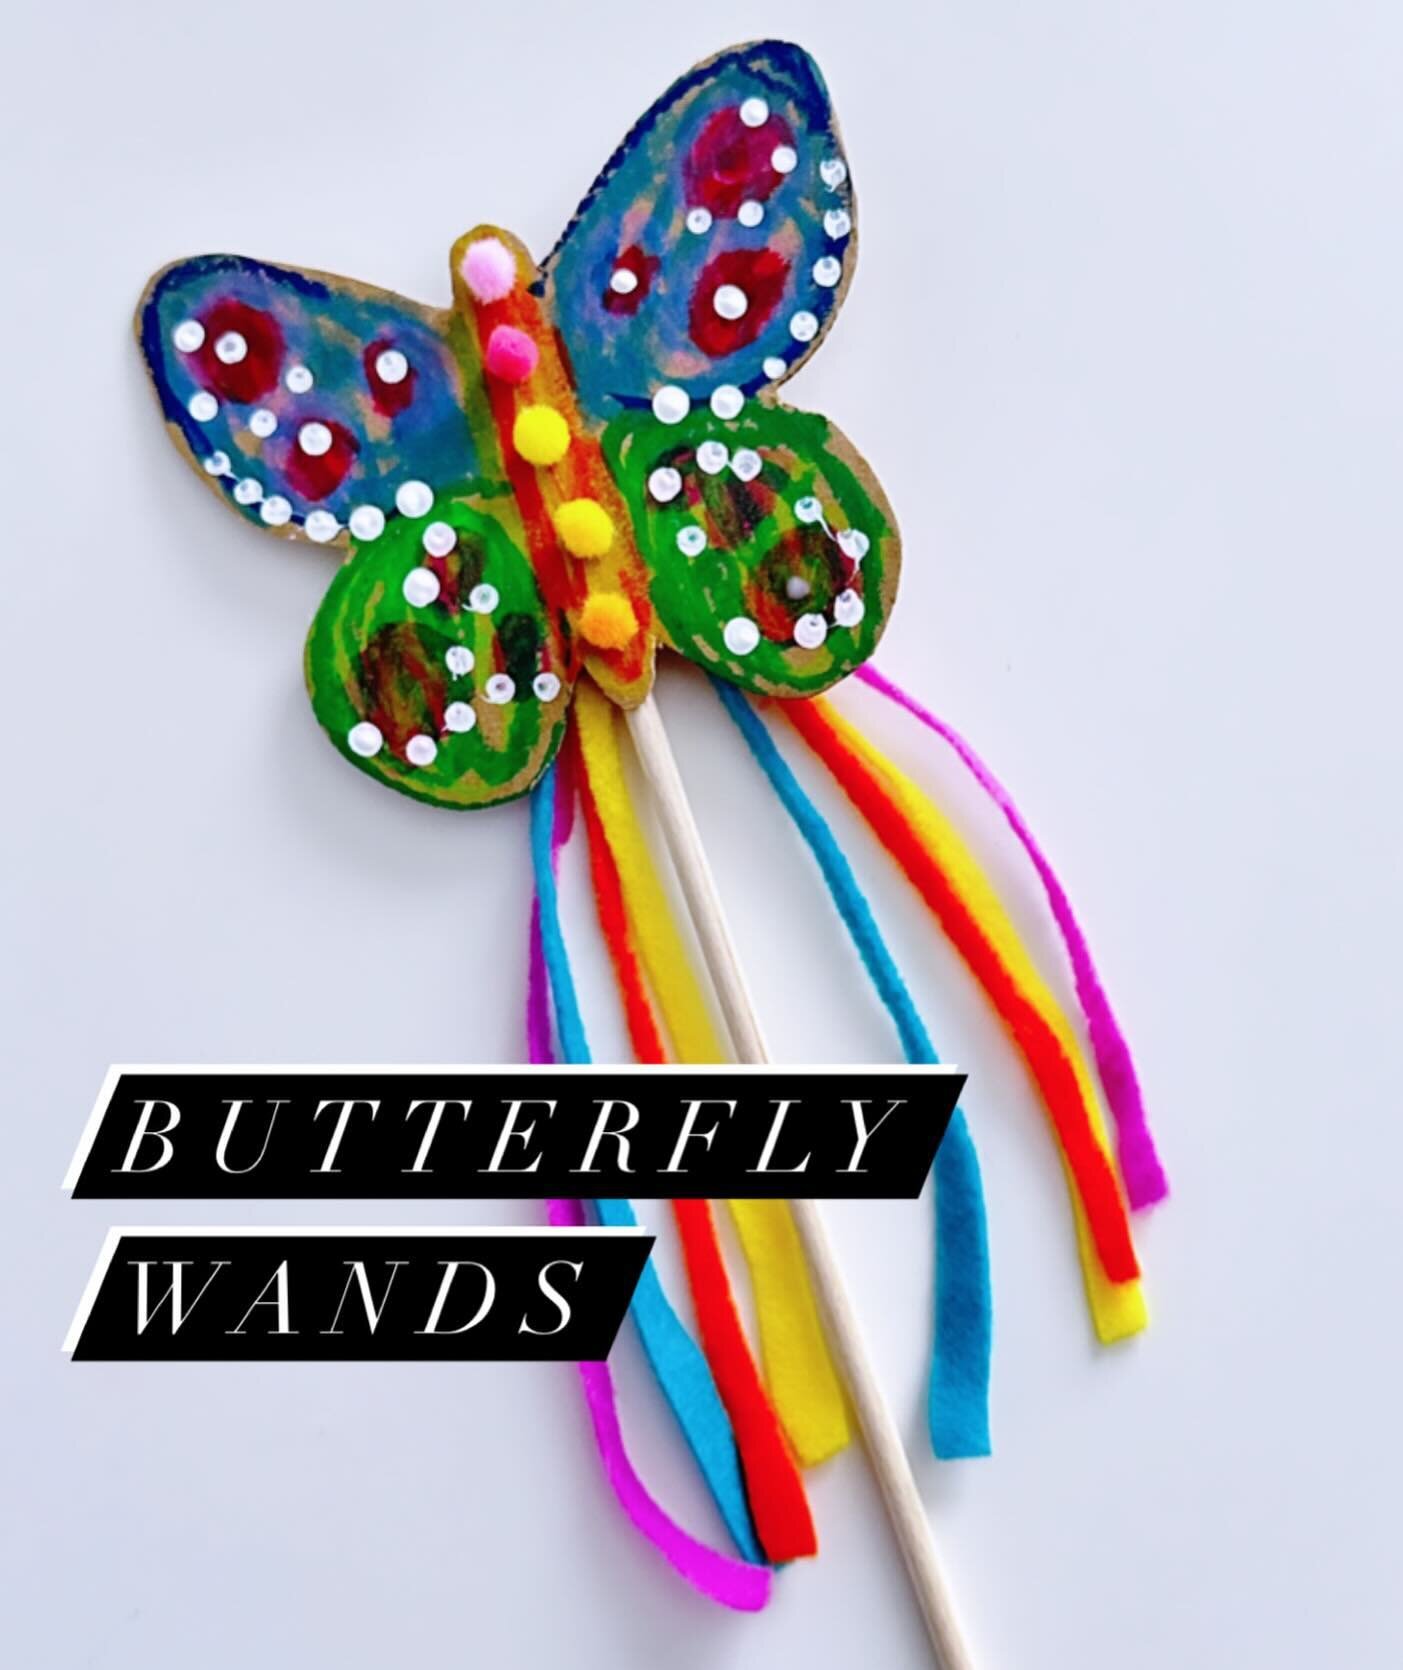 We&rsquo;re welcoming Spring with Butterflies! Sign-up and come have your little artist color, paint, decorate and glue these magical wands. We will have a spring themed story and sensory bins too. See you soon!

April 10 @periwinklefoxkids 
April 19